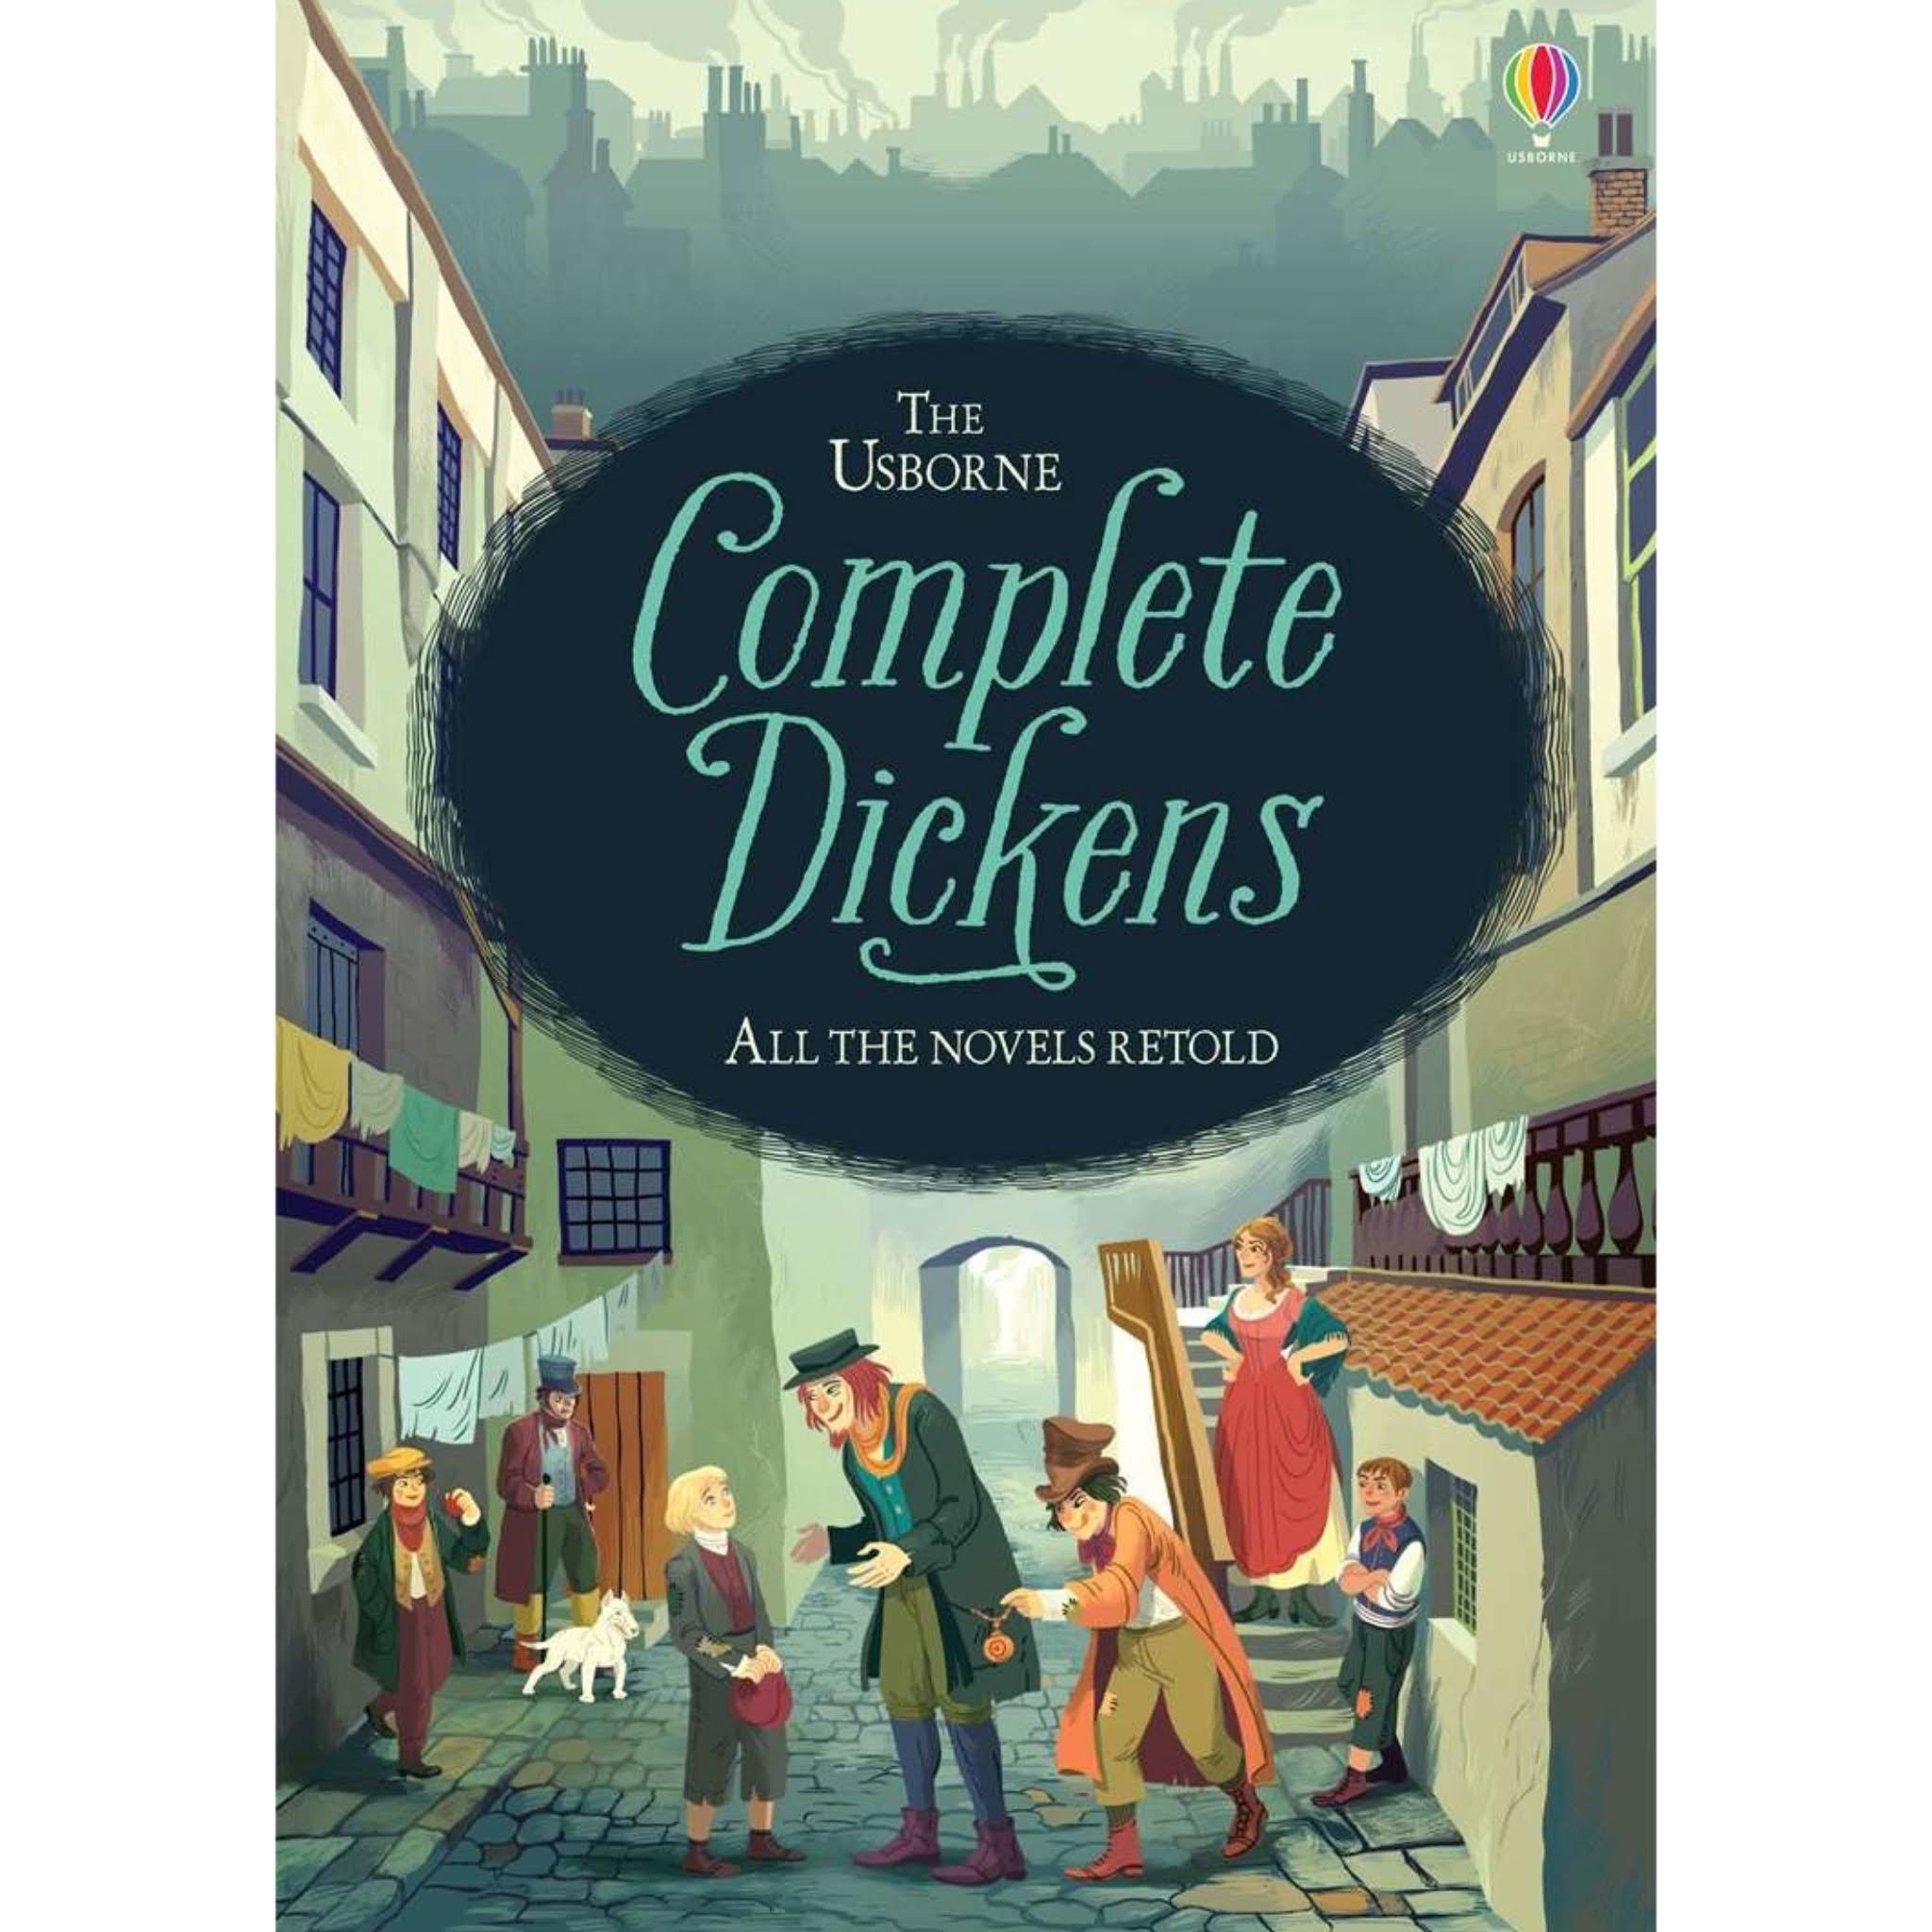 The Usborne Complete Dickens: All the Novels Retold [Book]